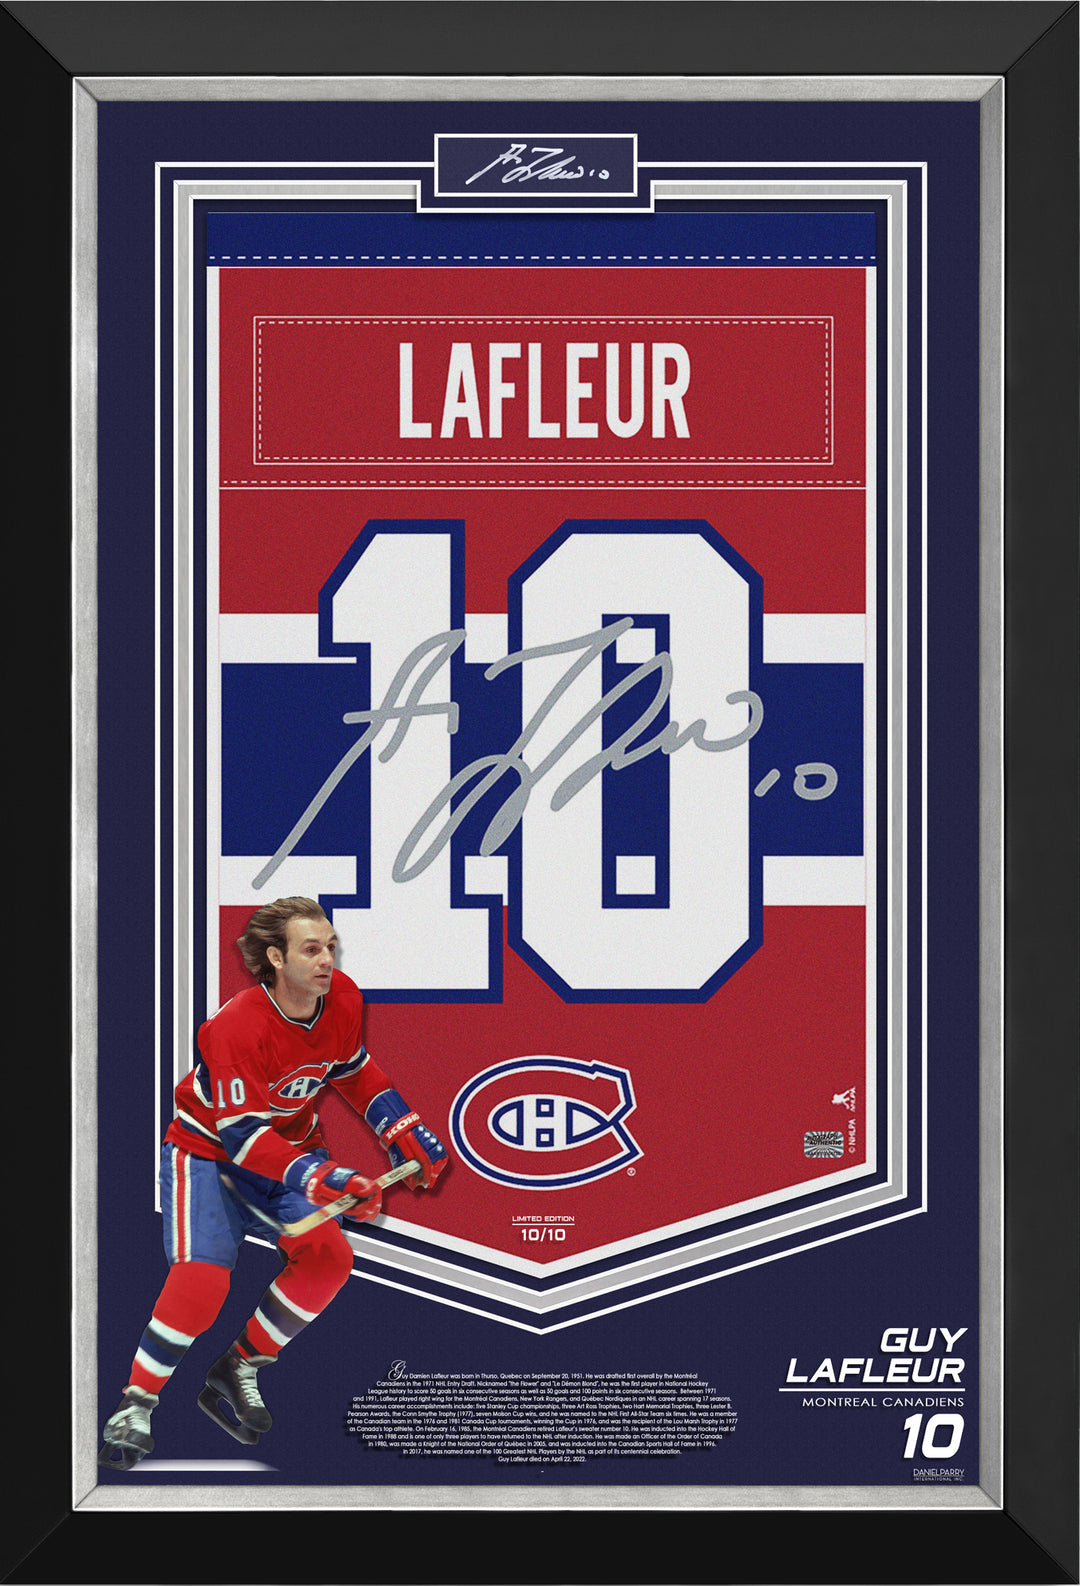 Guy Lafleur Framed Arena Banner Limited Edition #10 Of 10 Cut Signature, Montreal Canadiens, NHL, Hockey, Autographed, Signed, AAABH33030